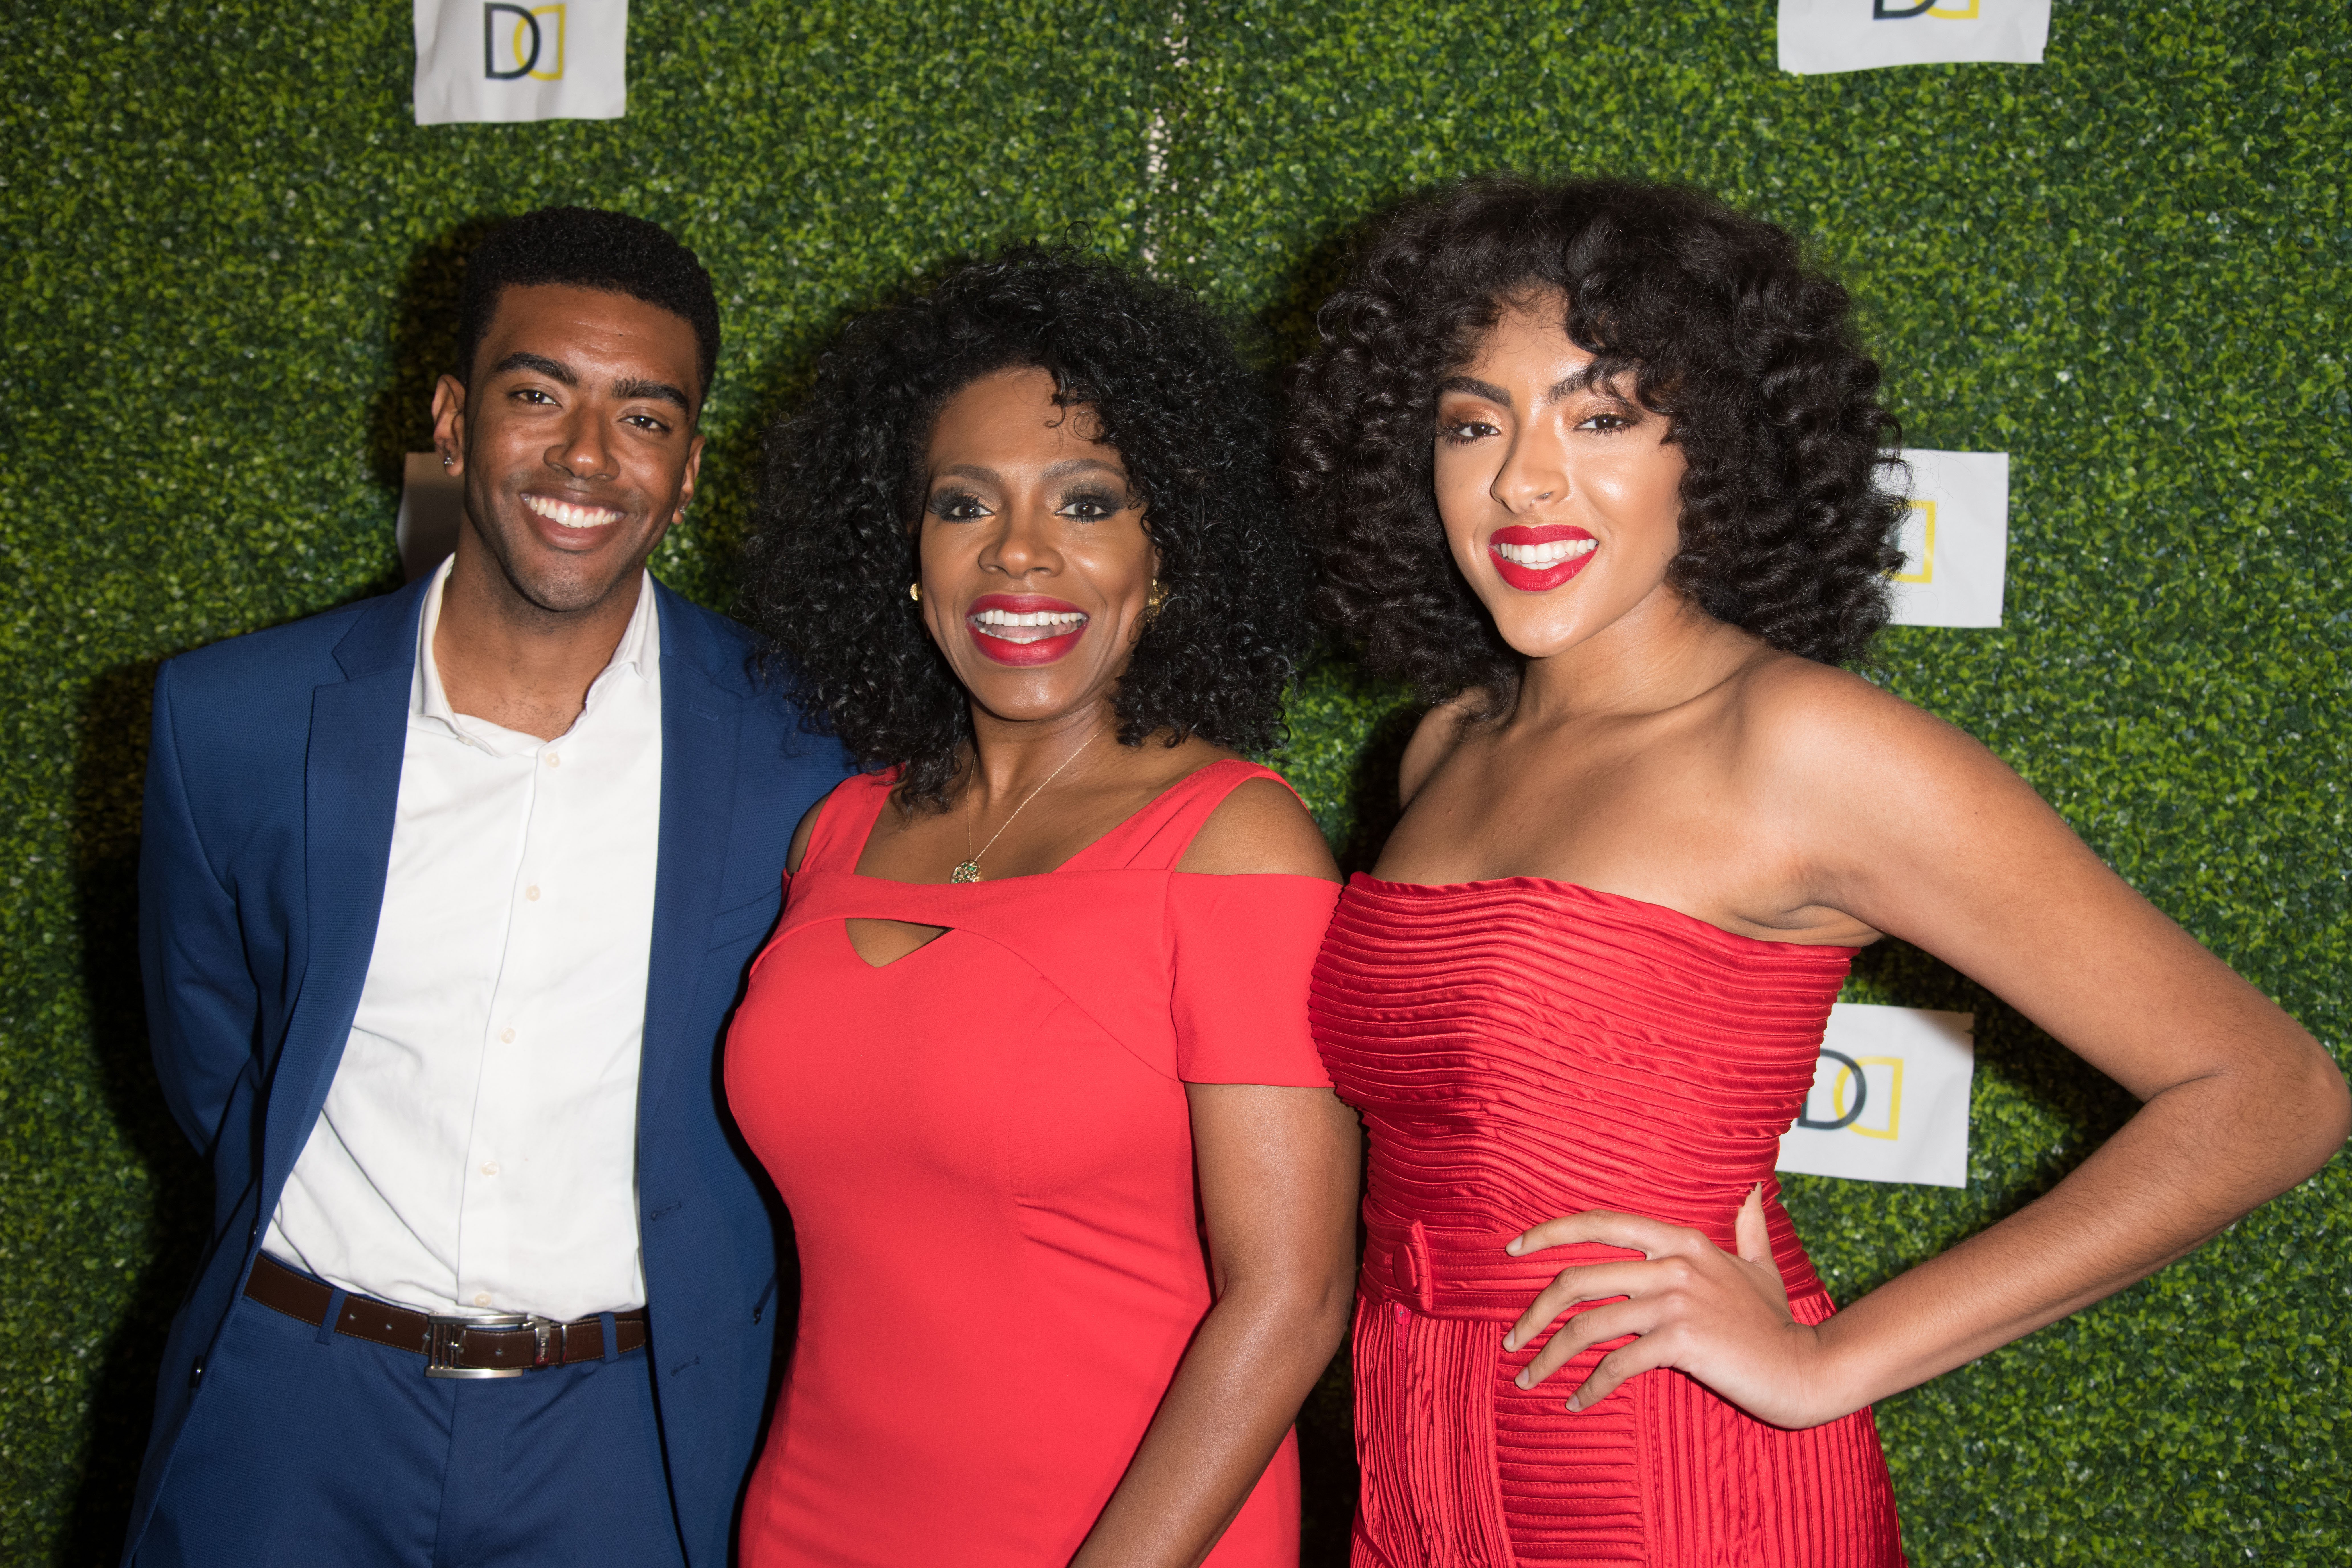 (L-R) Etienne Maurice, Sheryl Lee Ralph and Ivy-Victoria Maurice attend Koshie Mills Host "The Diaspora Dialogues" International Women Of Power Luncheon on March 2, 2018, in Marina del Rey, California. | Source: Getty Images